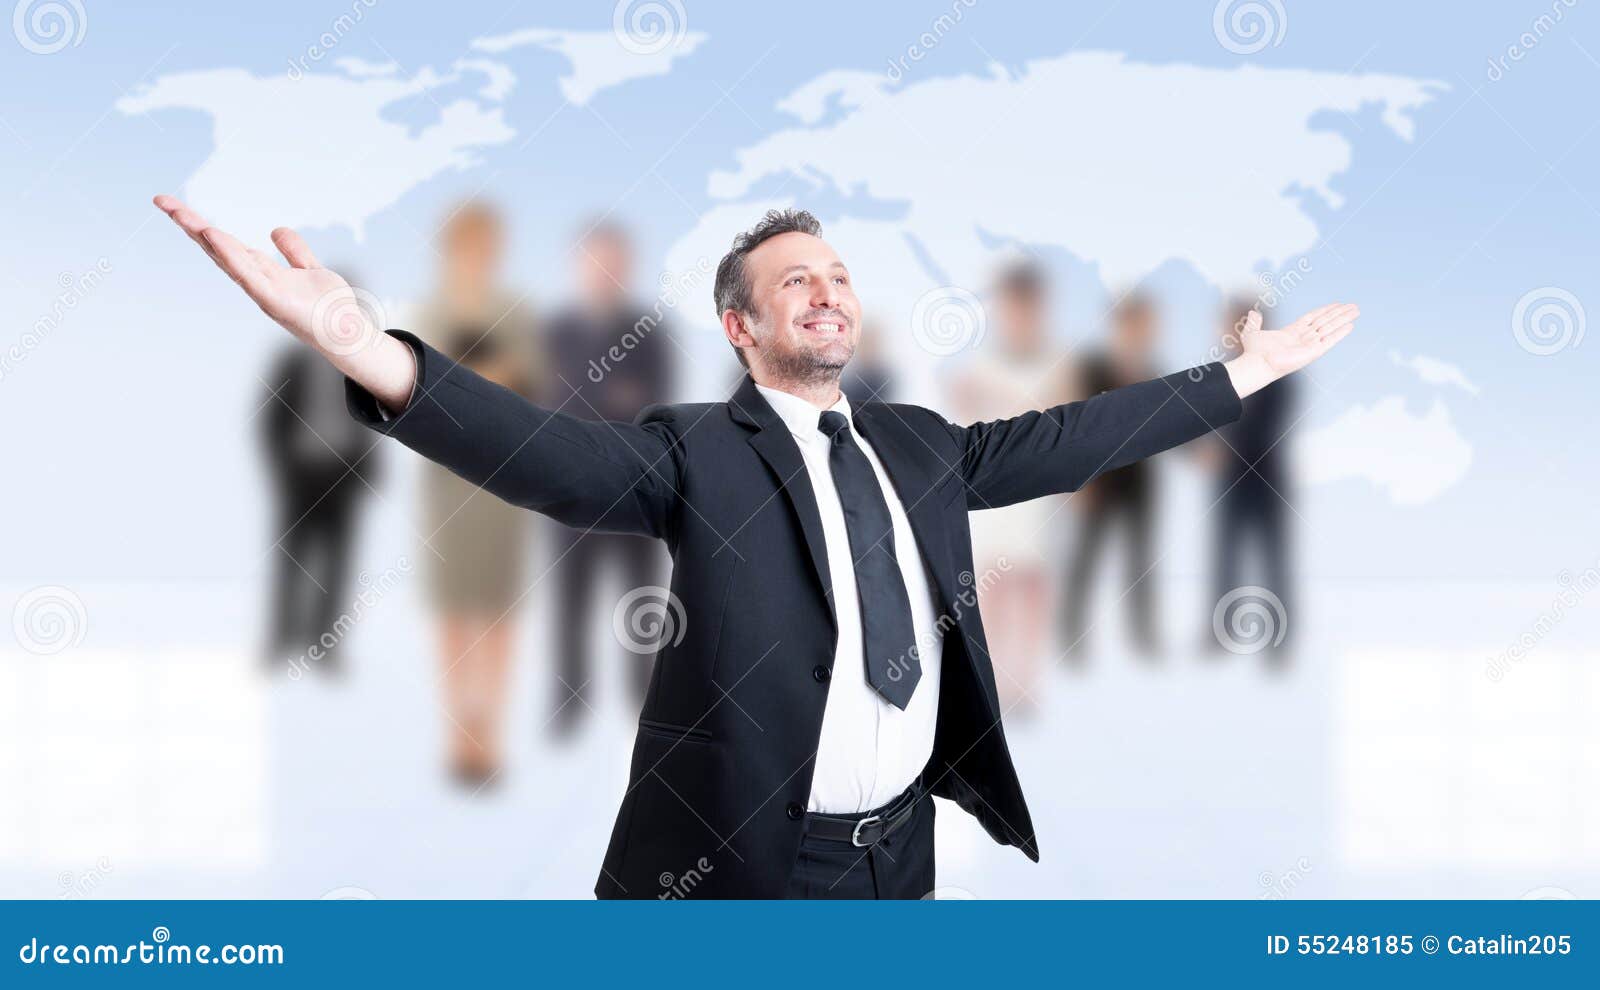 business man with arms outstretched or outspread